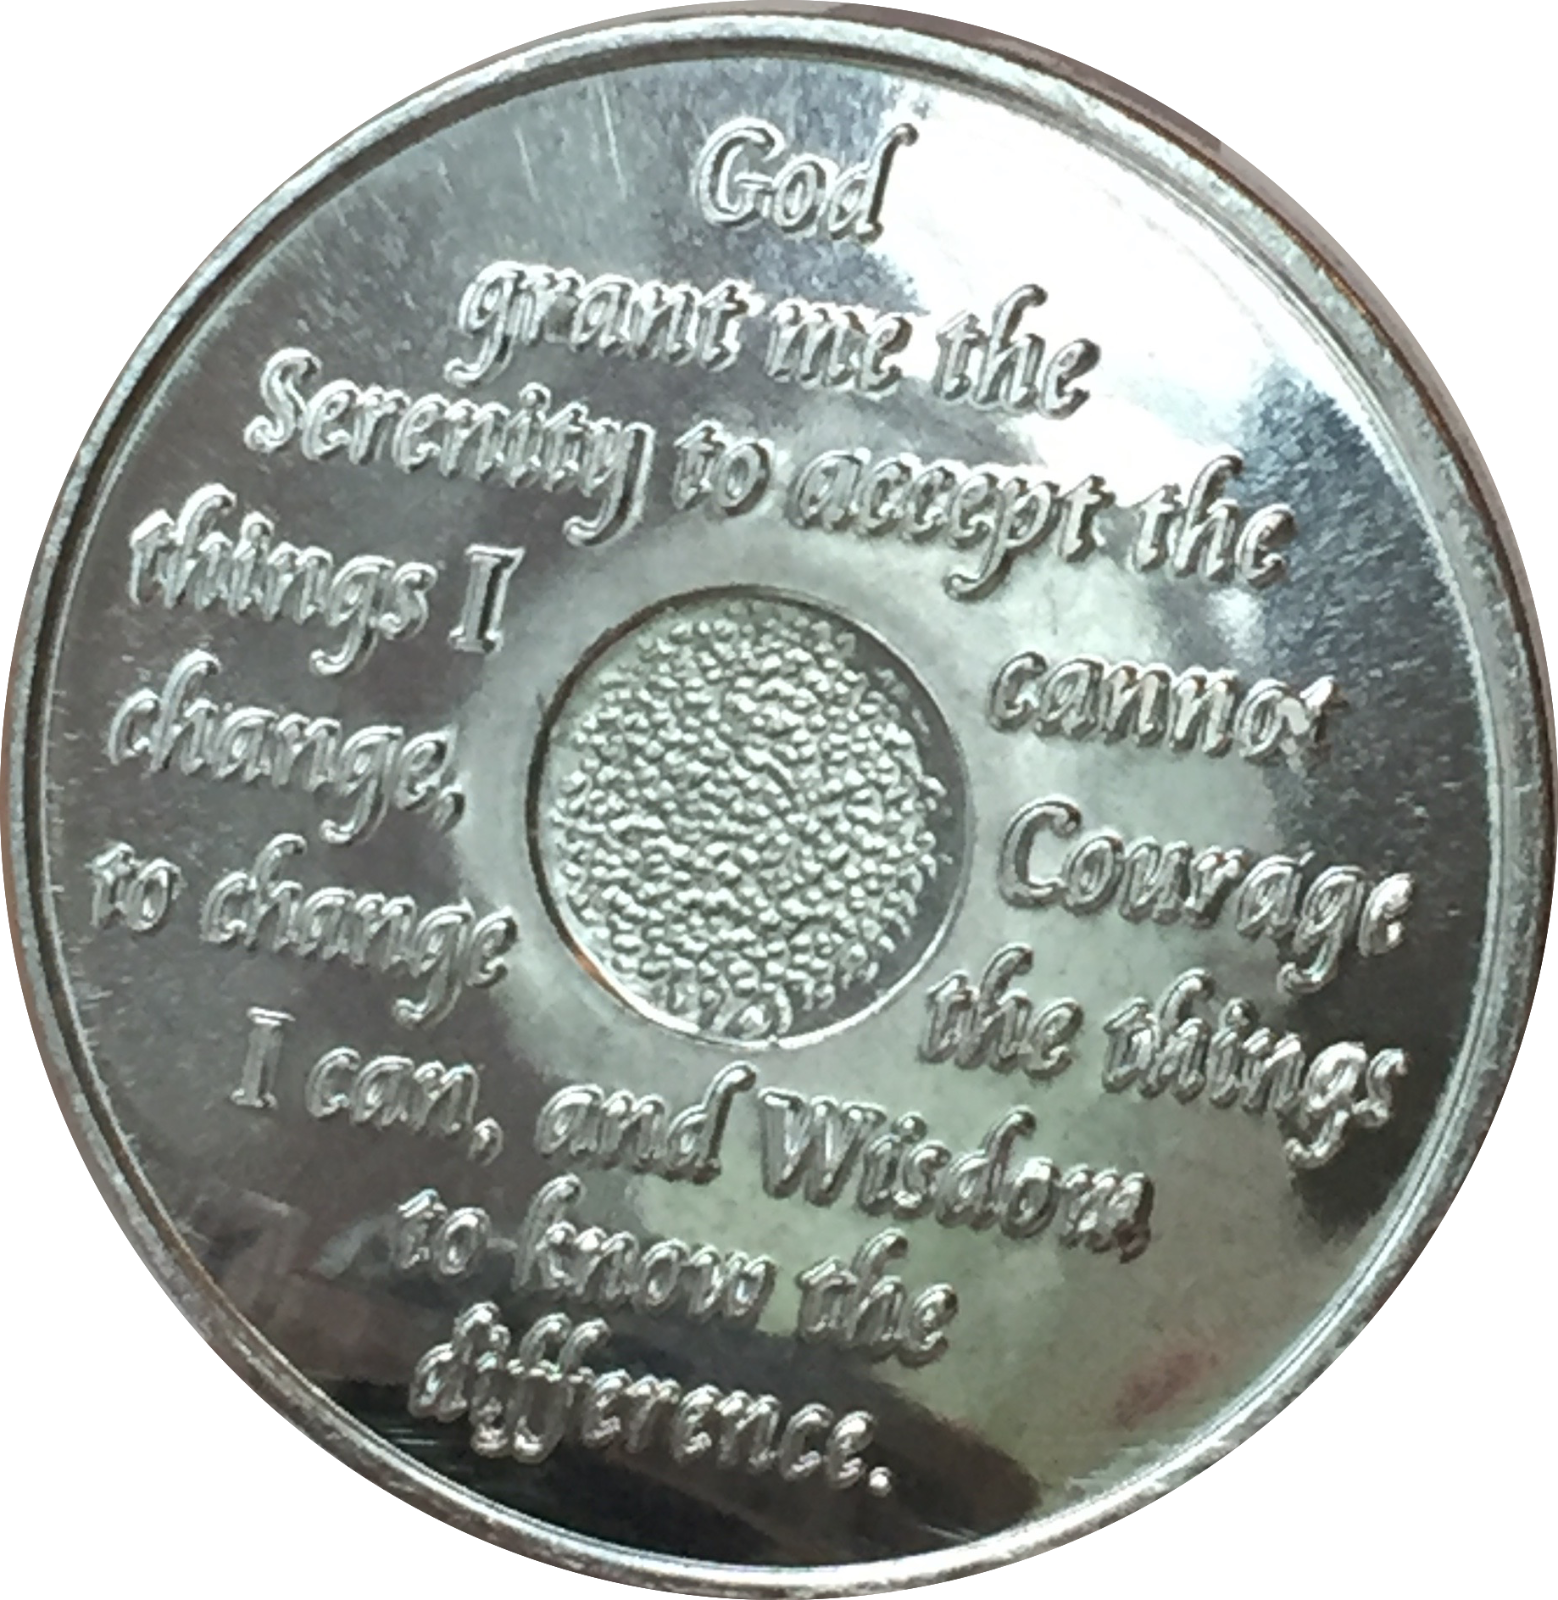 3 Month Purple Silver Plated AA Medallion 90 Day Chip Alcoholics Anonymous